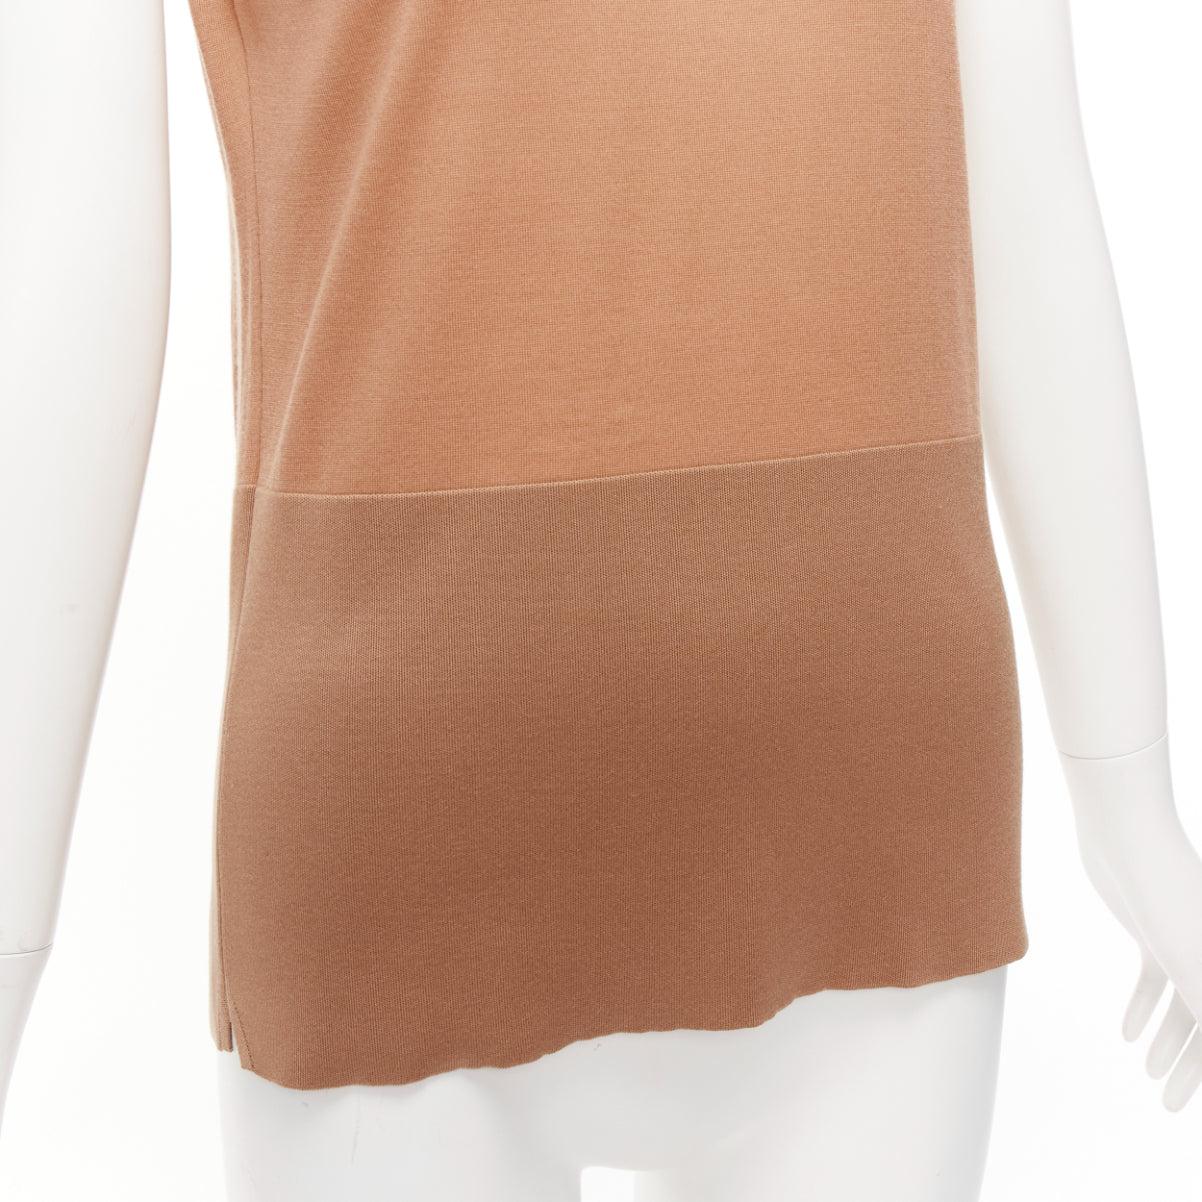 CELINE Phoebe Philo nude 100% wool silk bicolor wide strap vest knitted top XS
Reference: LNKO/A02342
Brand: Celine
Designer: Phoebe Philo
Material: Wool, Silk
Color: Nude
Pattern: Patchwork
Closure: Pullover
Made in: Italy

CONDITION:
Condition: